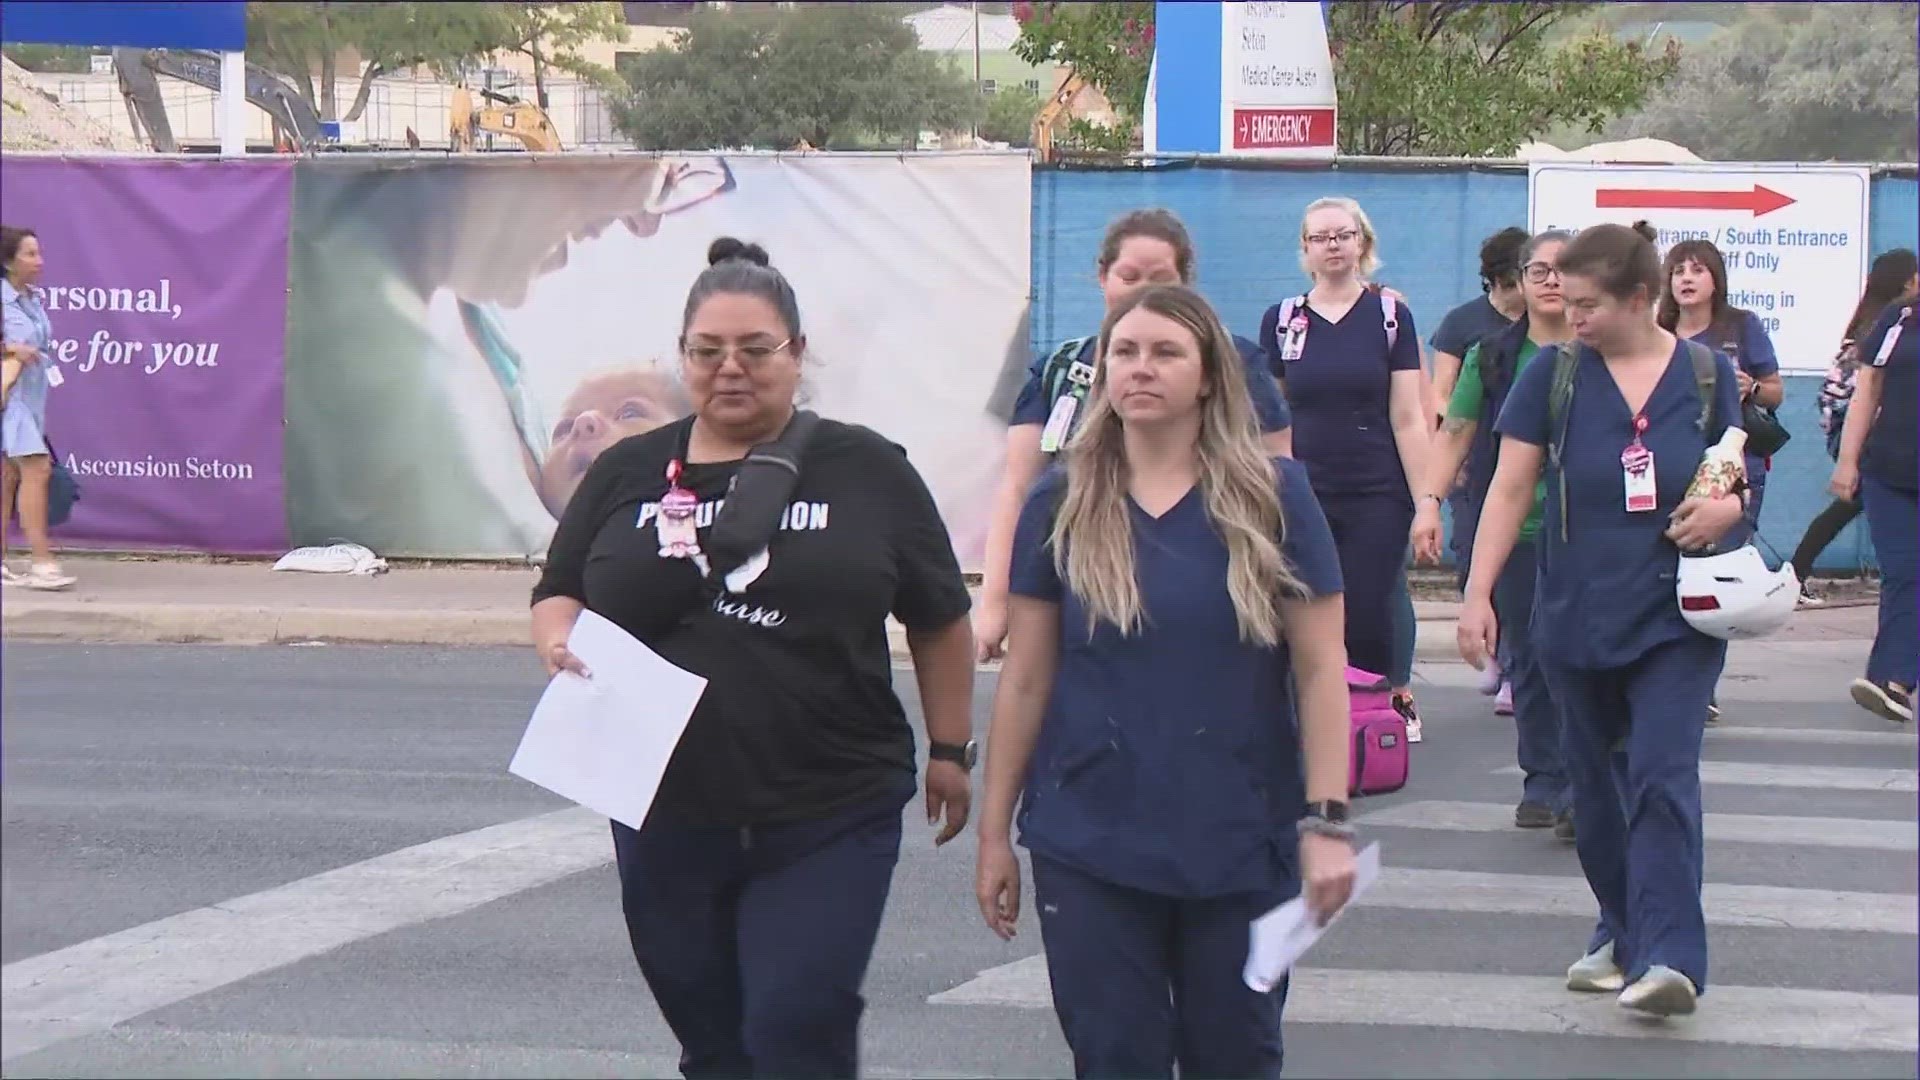 A group of nurses hand-delivered the letter of demands to management Wednesday morning.